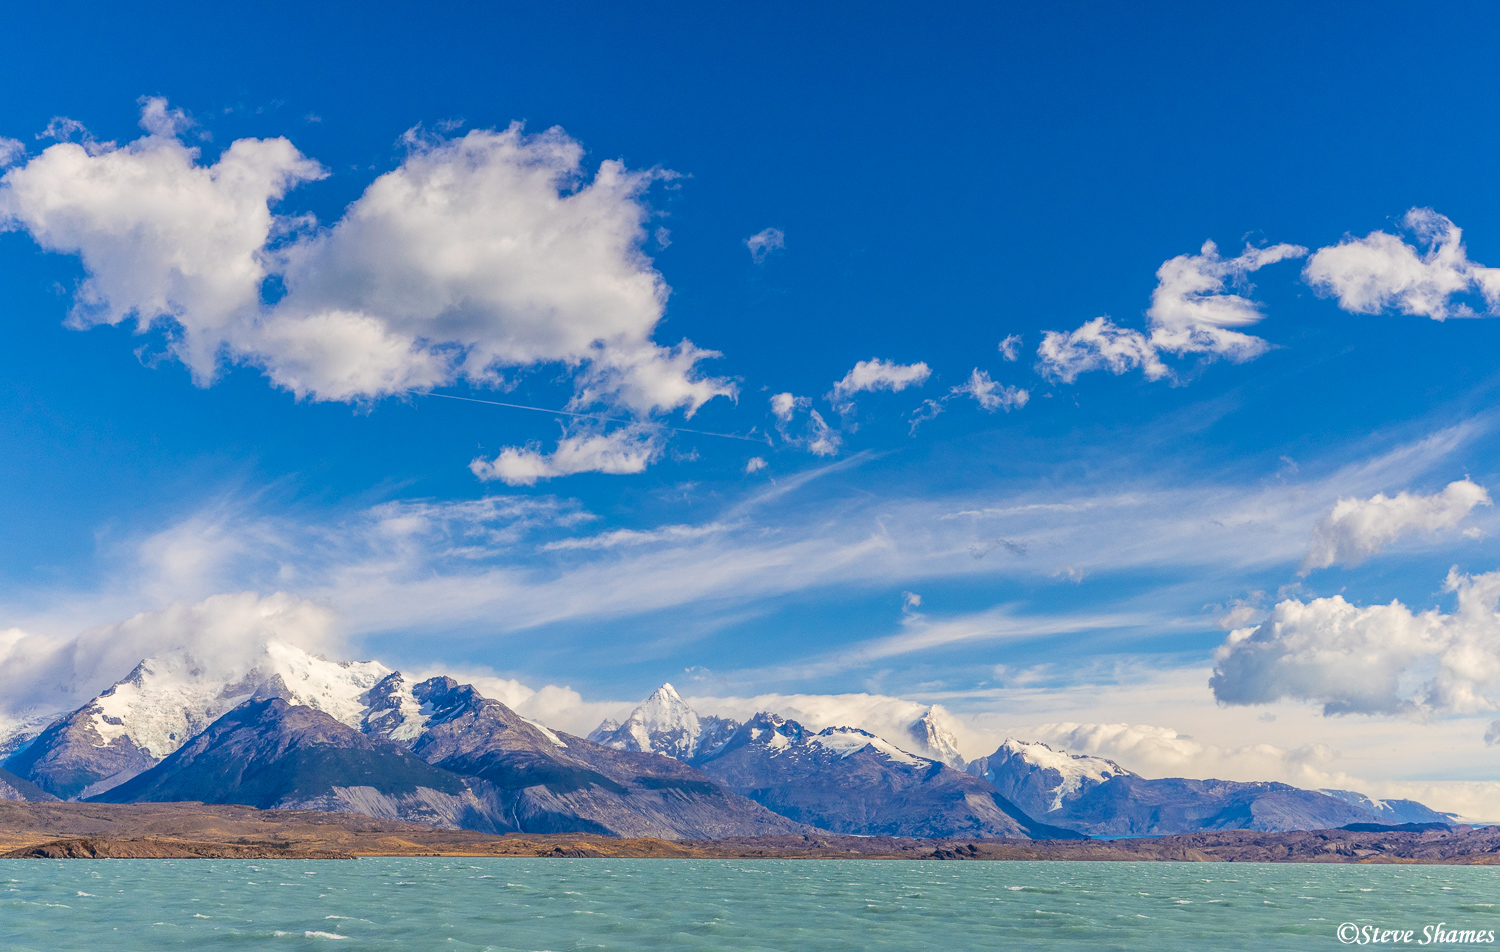 Beautiful skies and mountains make for a nice scene on Lago Argentino.